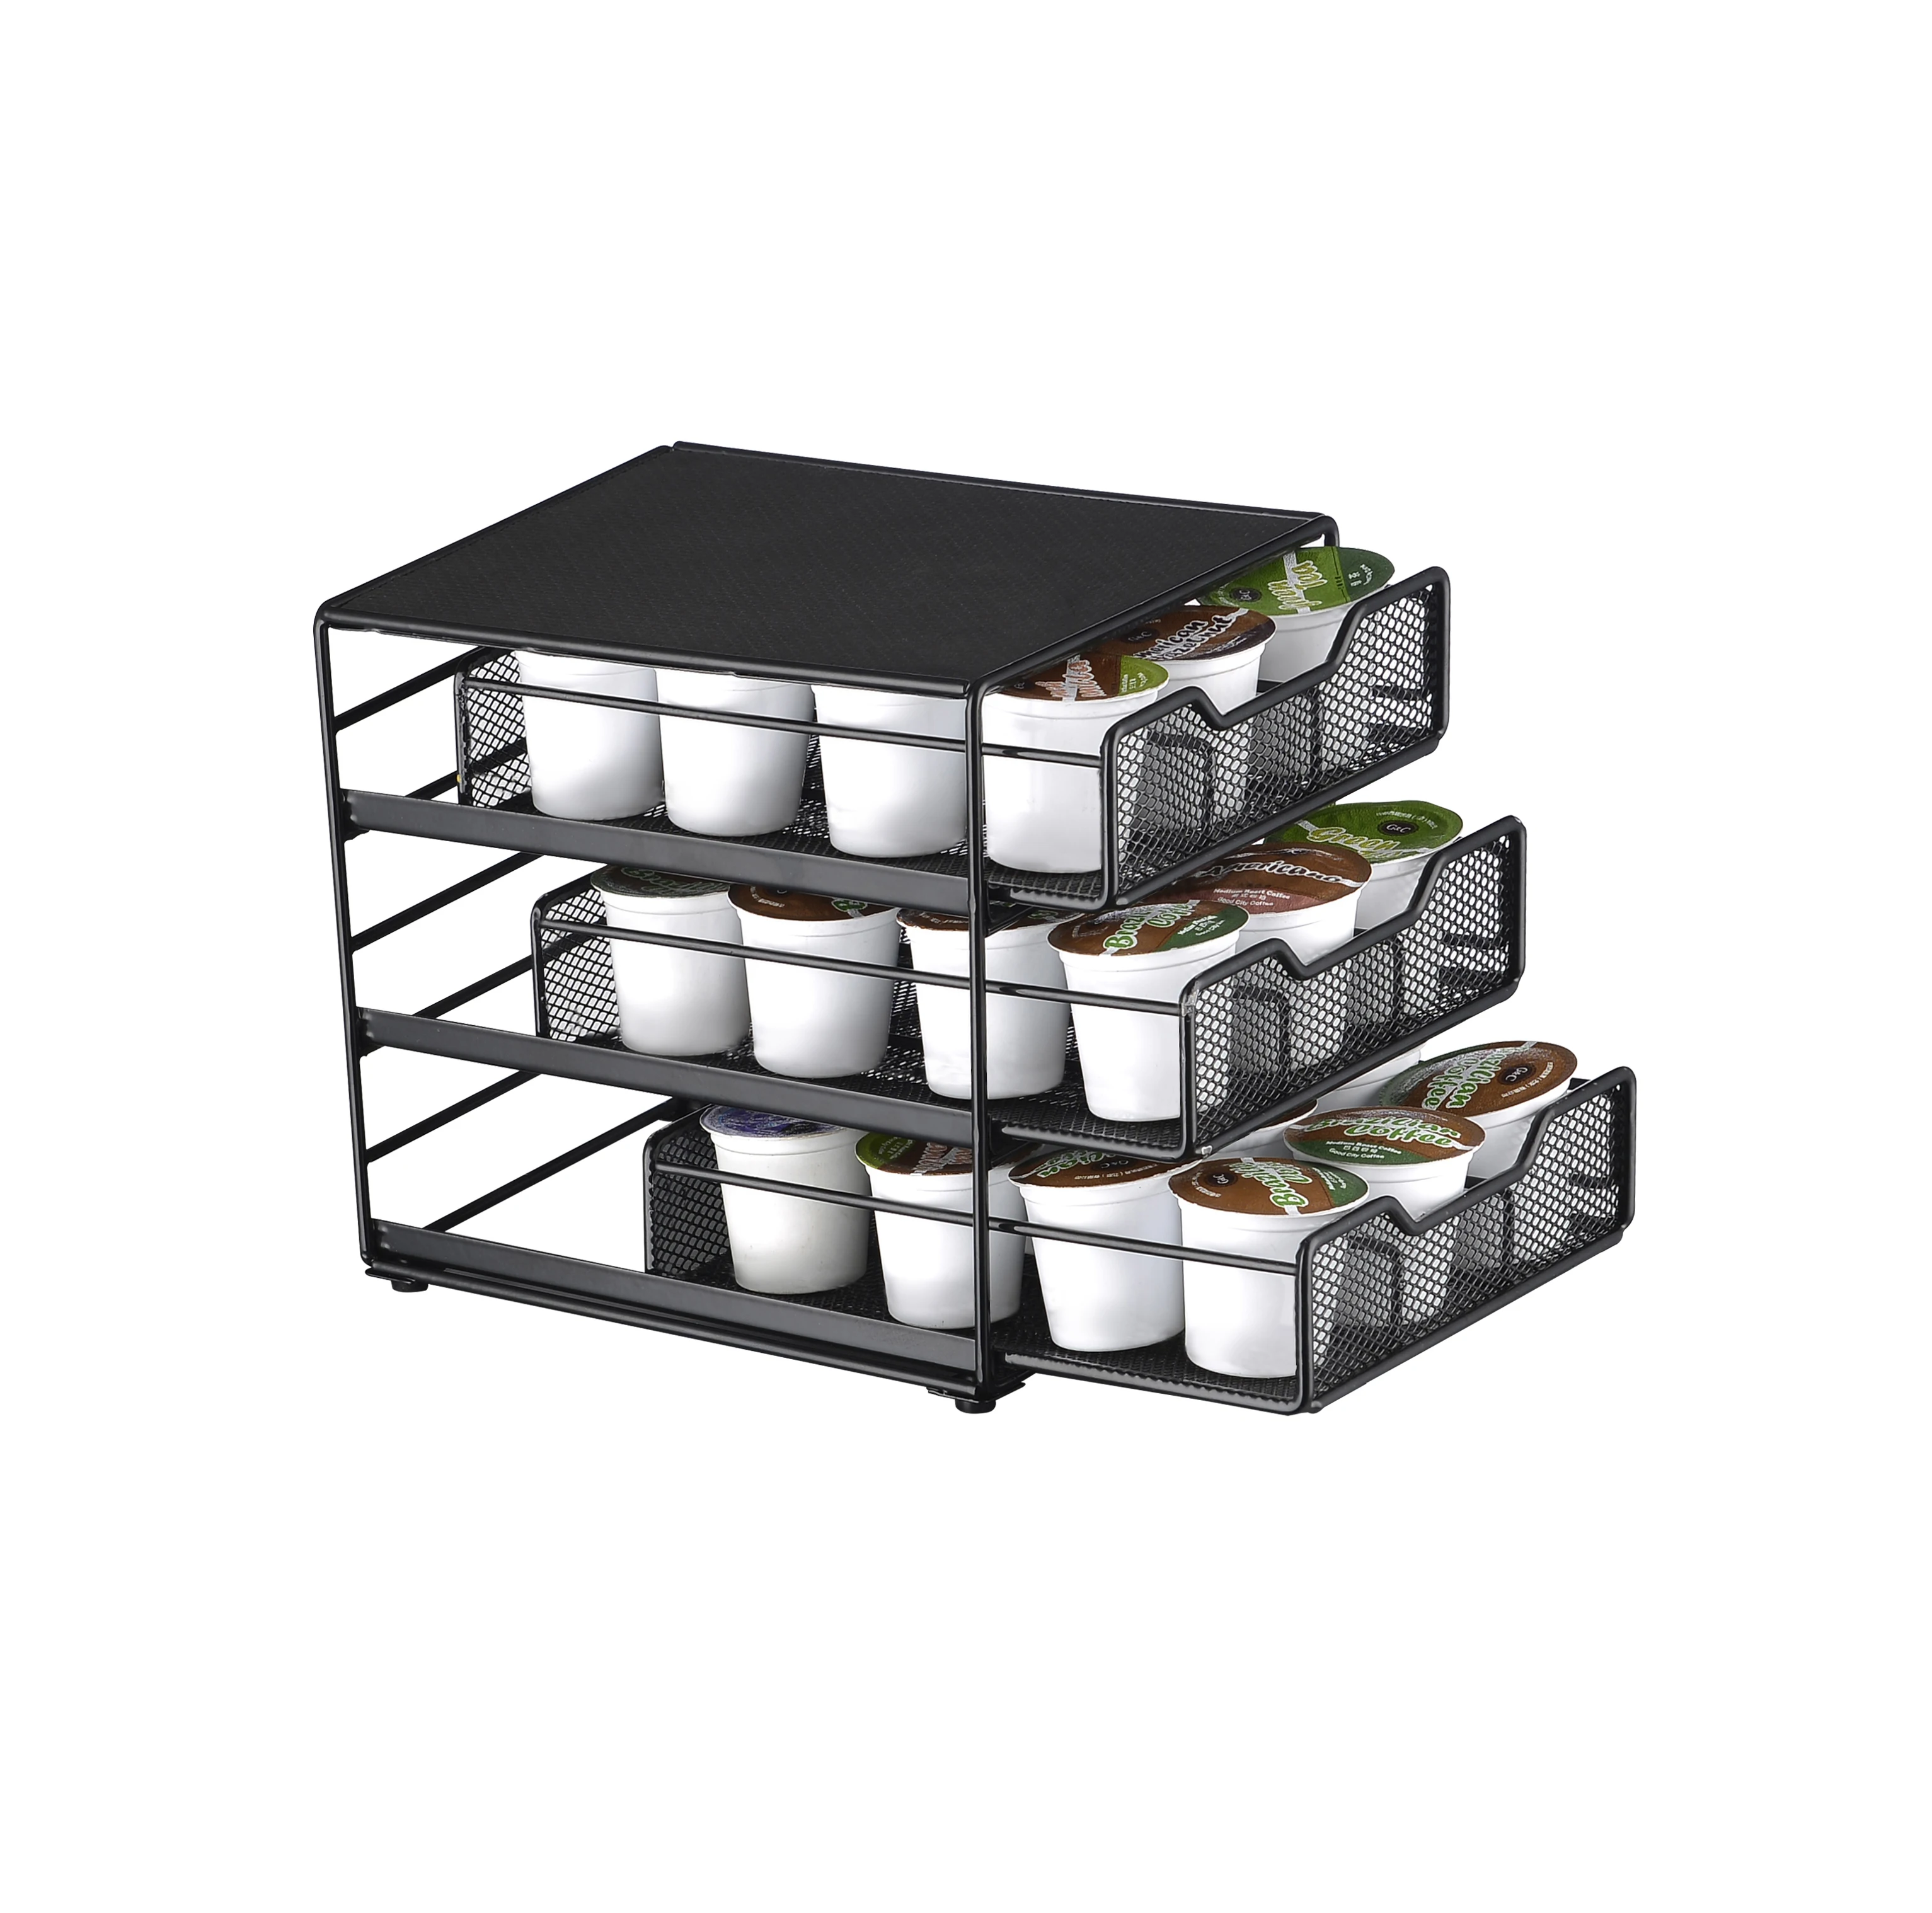 

WIDENY 3 Tier 48 Dolce Gusto K-cup Black Metal Iron Wire Capsule Storage Drawer for Holder Coffee Pod, White